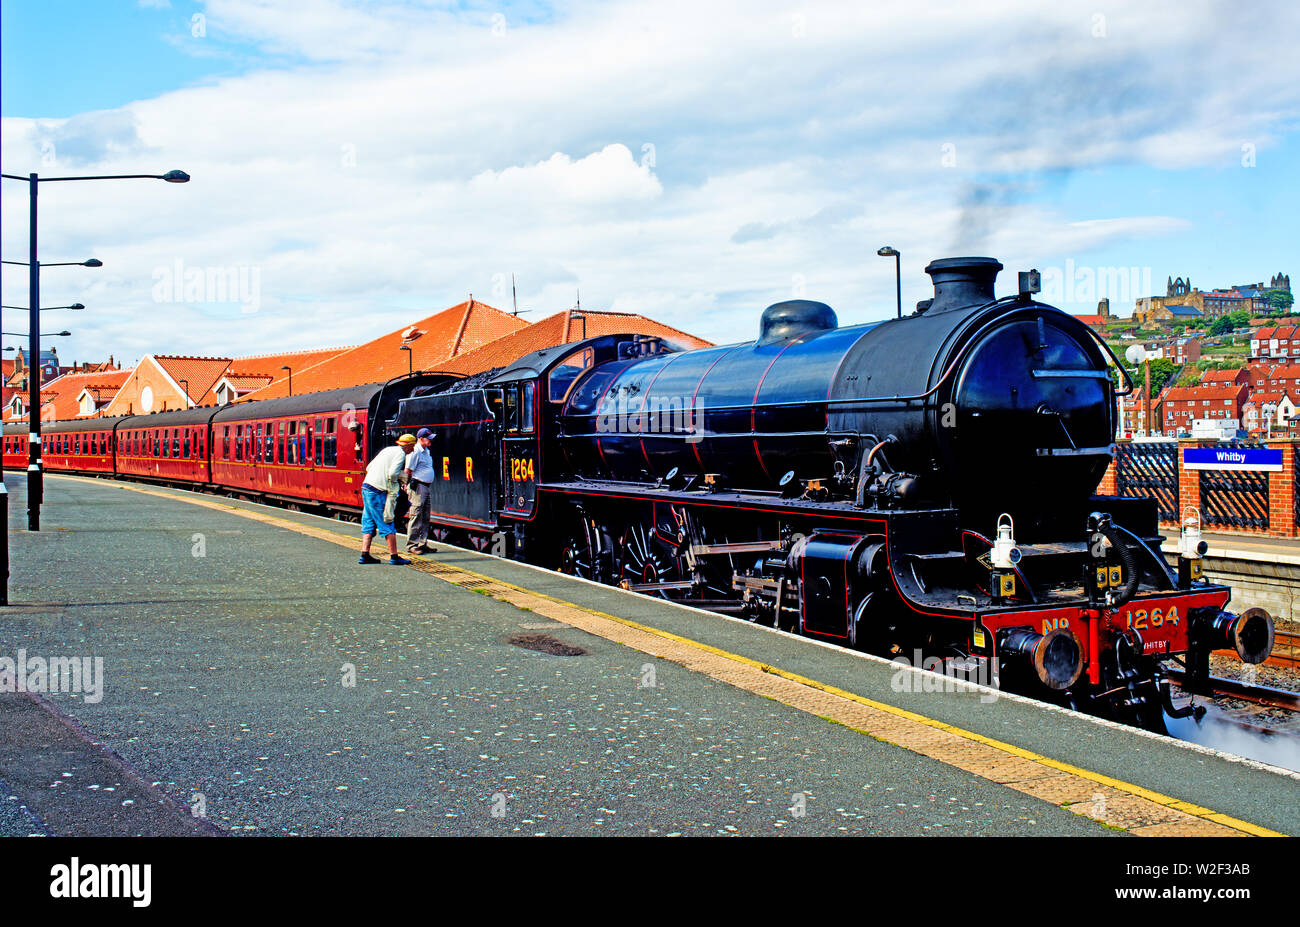 B1 Class No 1264 at Whitby Railway Station, Whitby, North Yorkshire Stock Photo